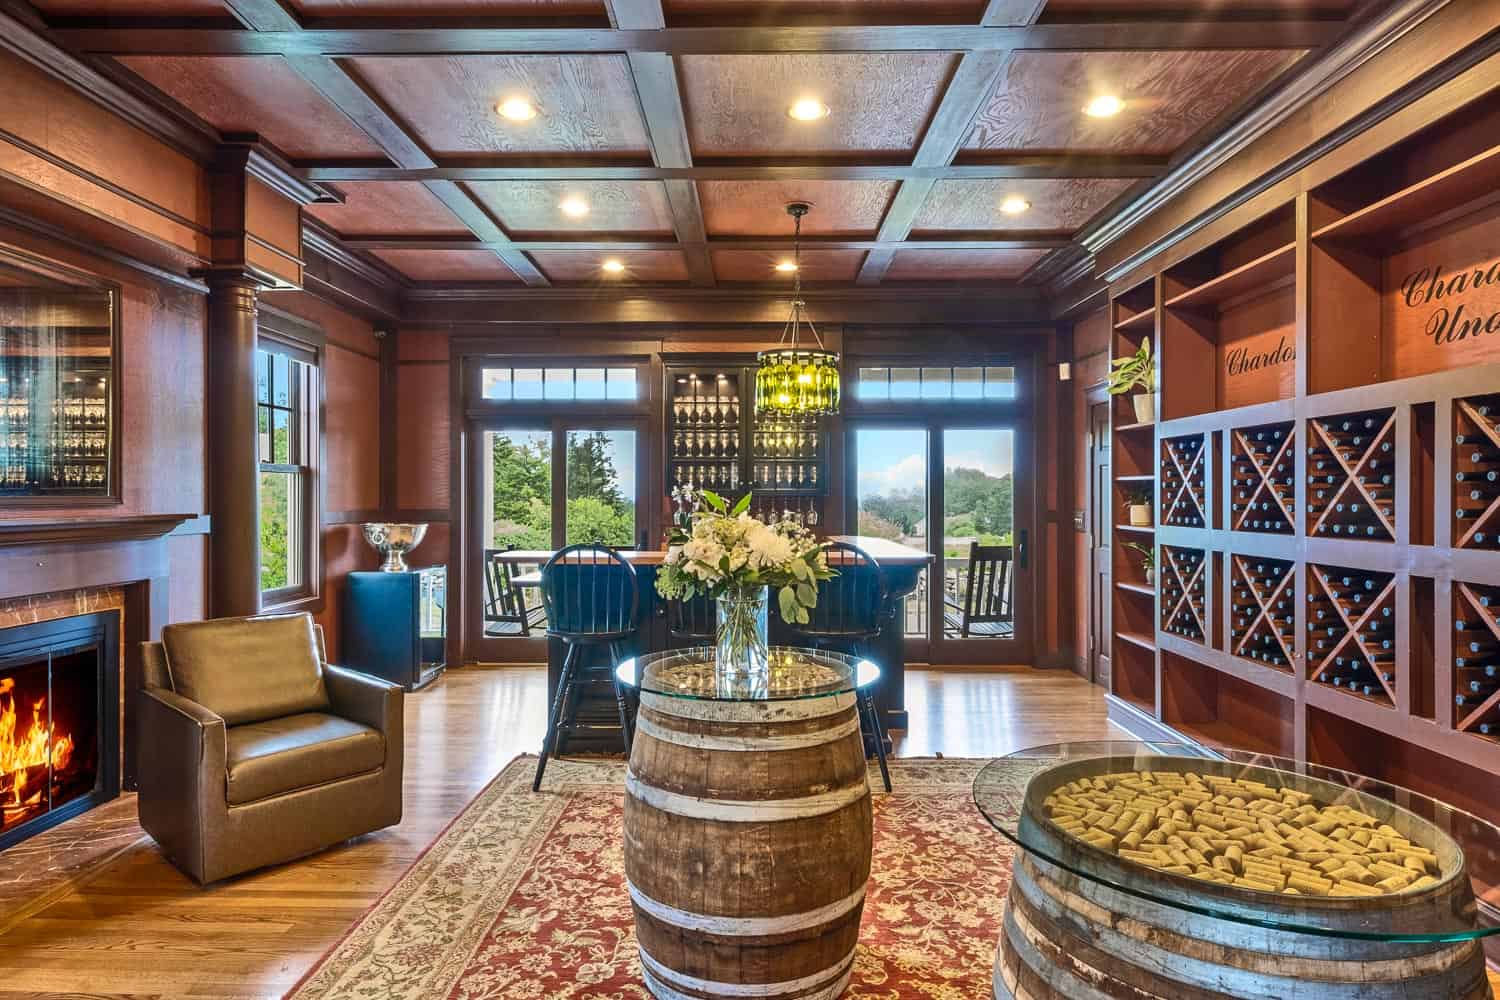 Elegant room featuring a central barrel table, wine rack, lit fireplace, and a sophisticated wooden design with ceiling panels.